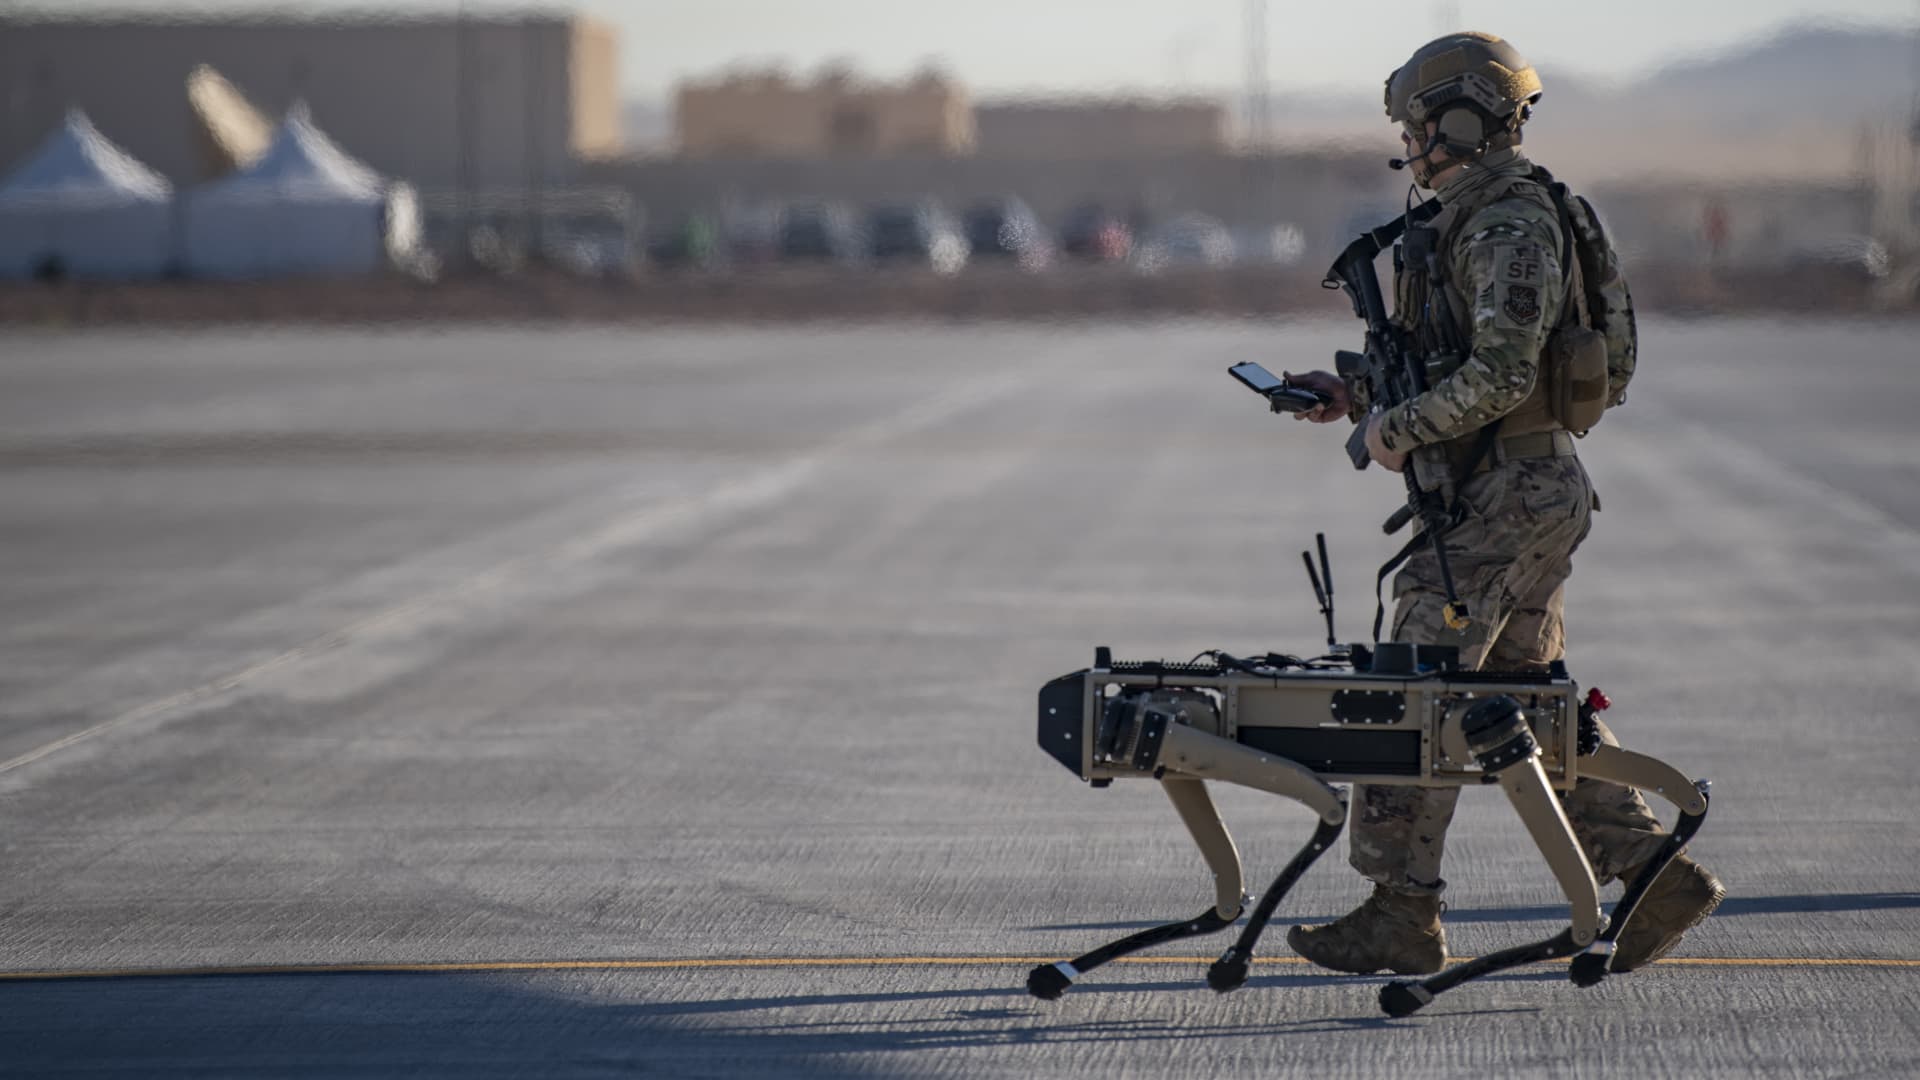 Tech. Sgt. John Rodiguez, 321st Contingency Response Squadron security team, patrols with a Ghost Robotics Vision 60 prototype at a simulated austere base during the Advanced Battle Management System exercise on Nellis Air Force Base, Nev., Sept. 3, 2020.